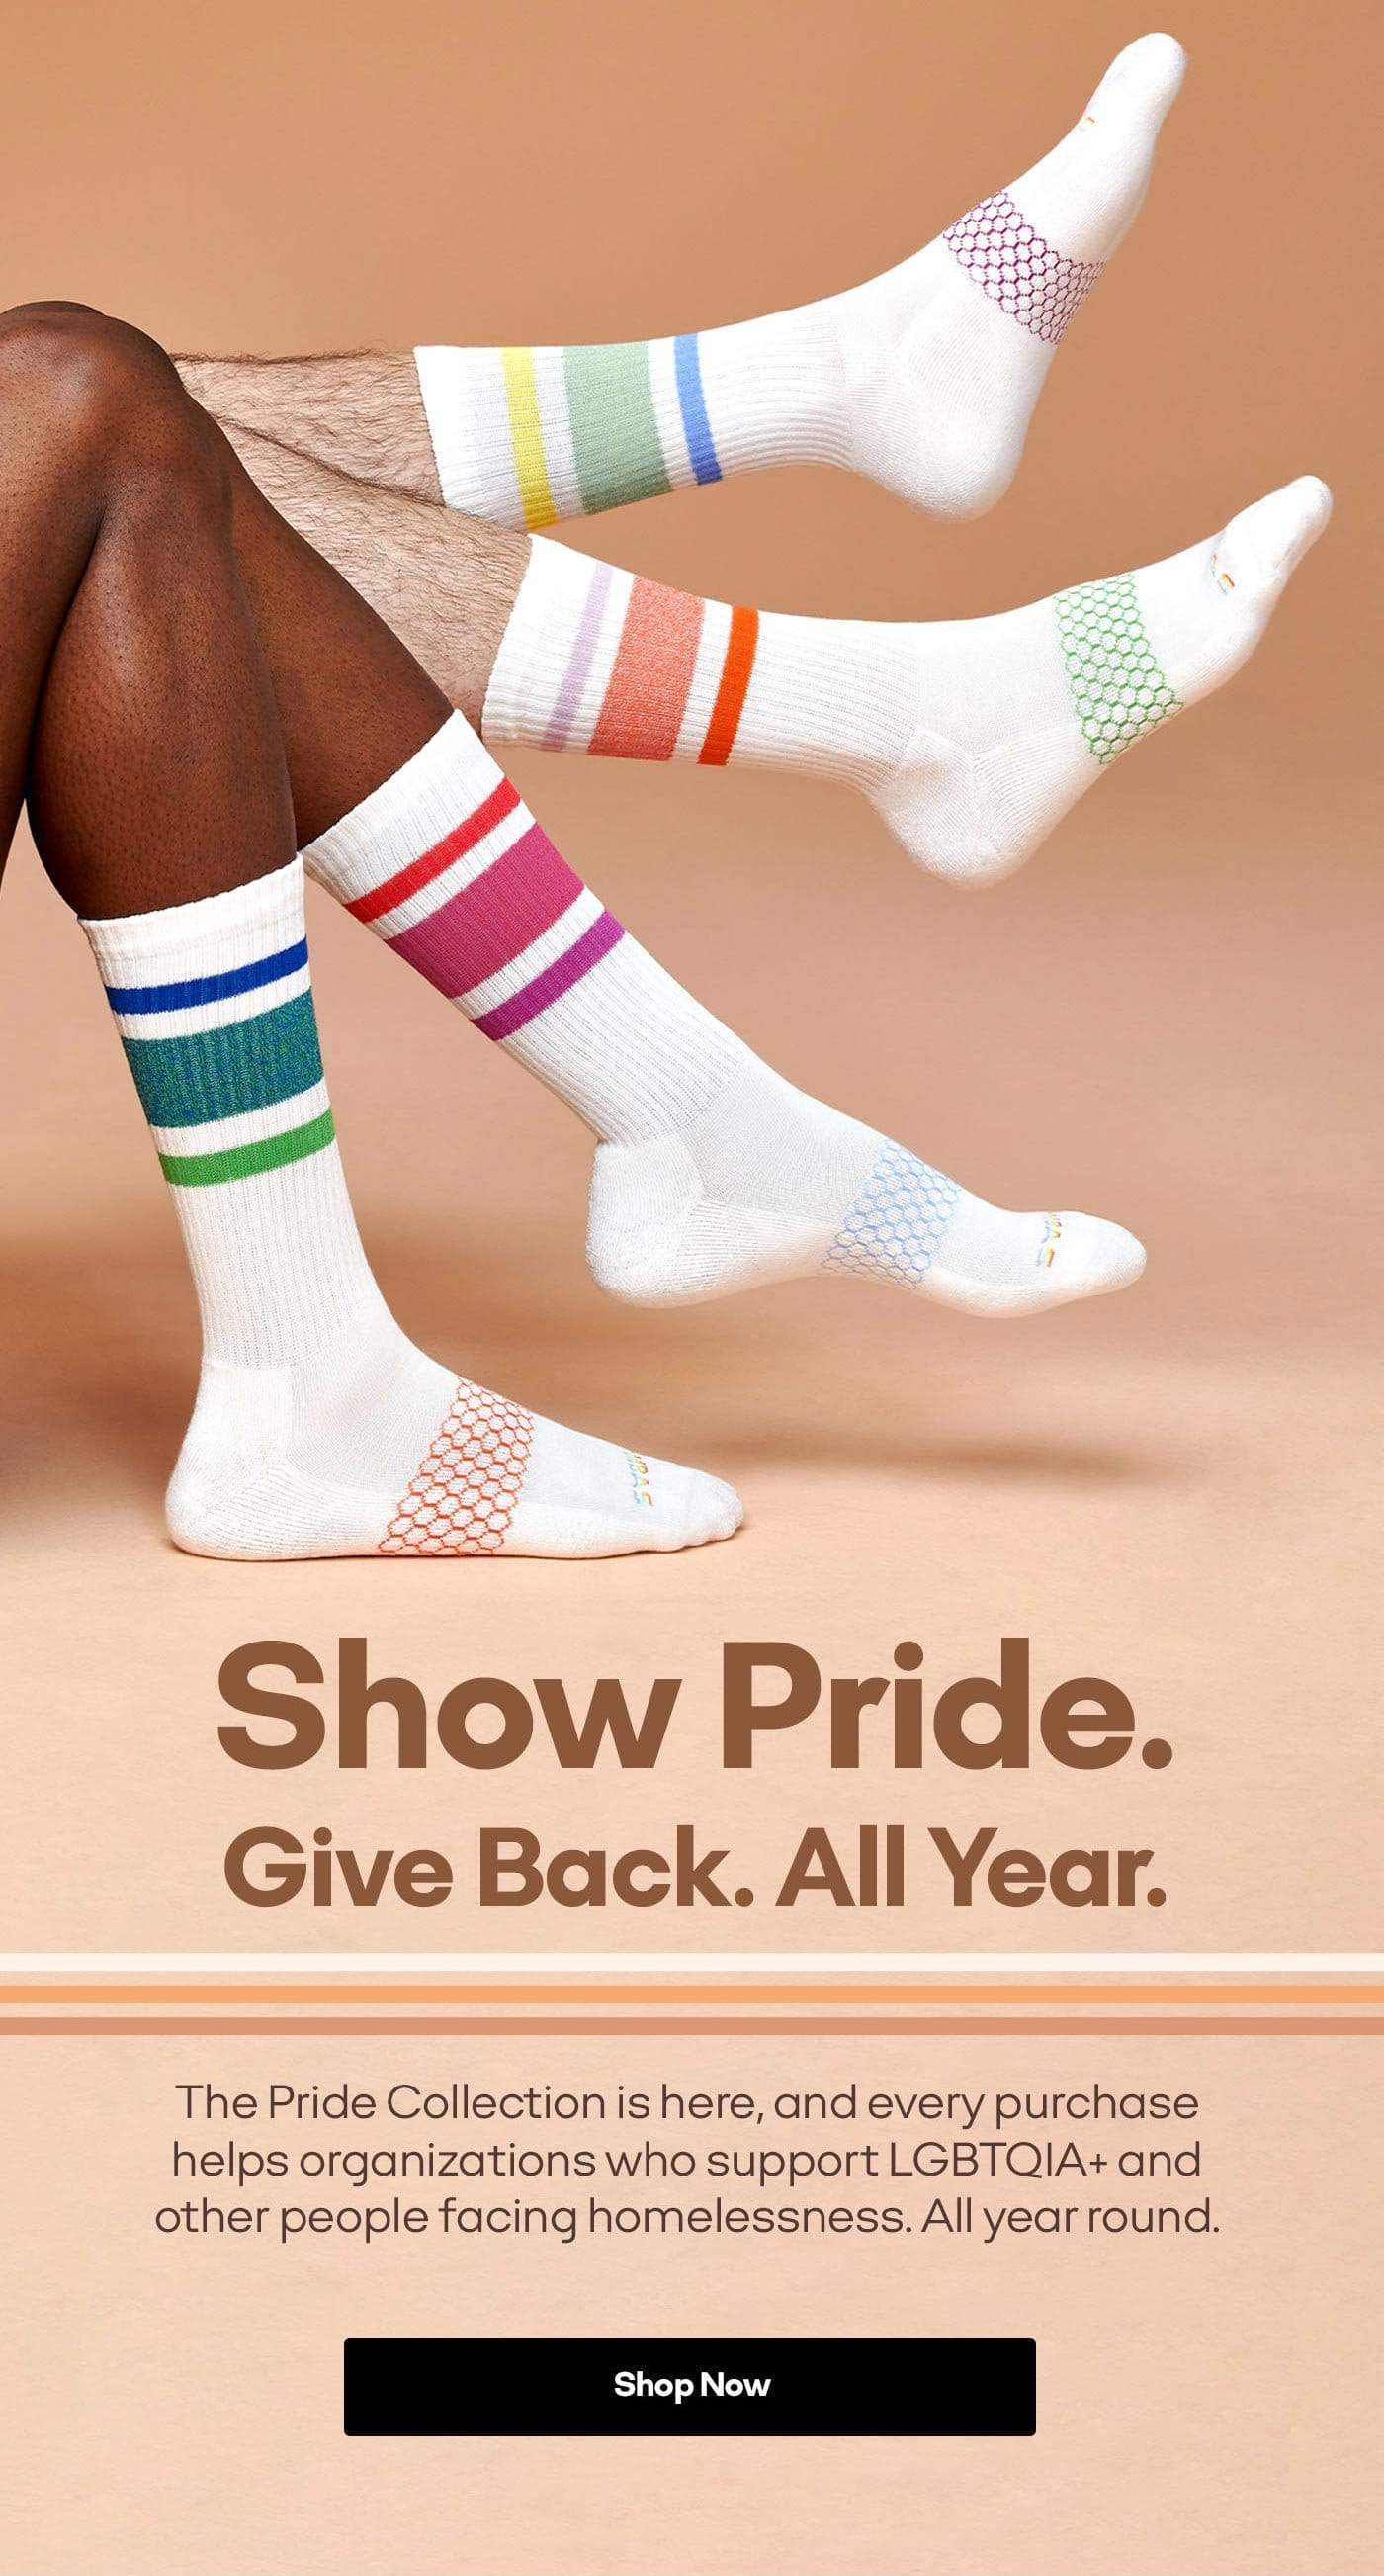 Show Pride. Give Back. All Year. The Pride Collection is here, and every purchase helps organizations who support LGBTQIA+ and other people facing homelessness. All year round.Shop Now